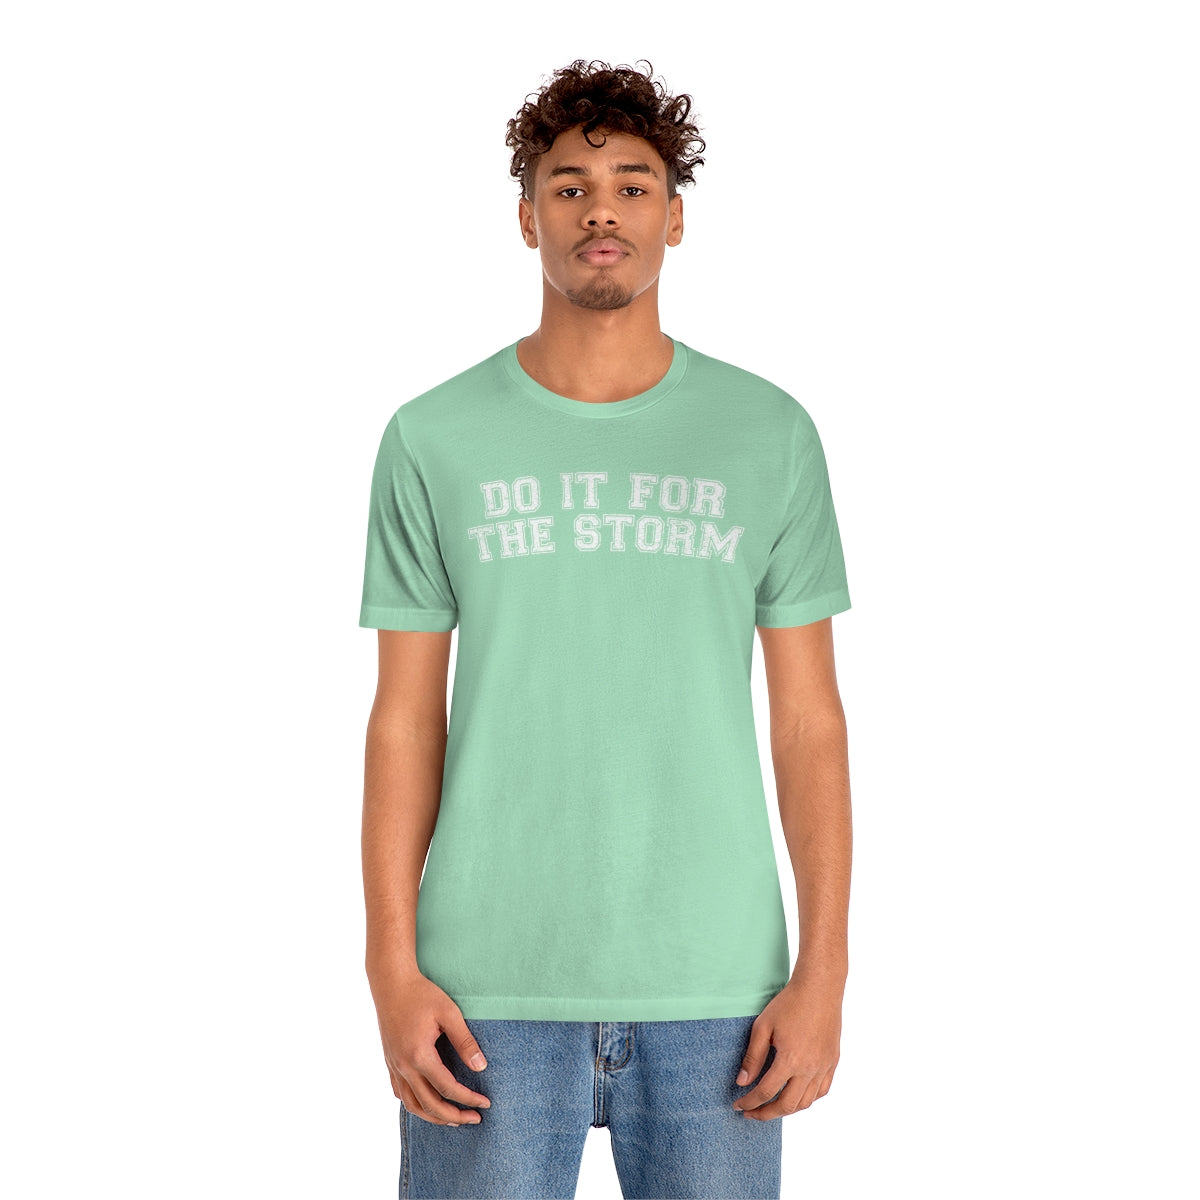 Do It For The Storm Tee 